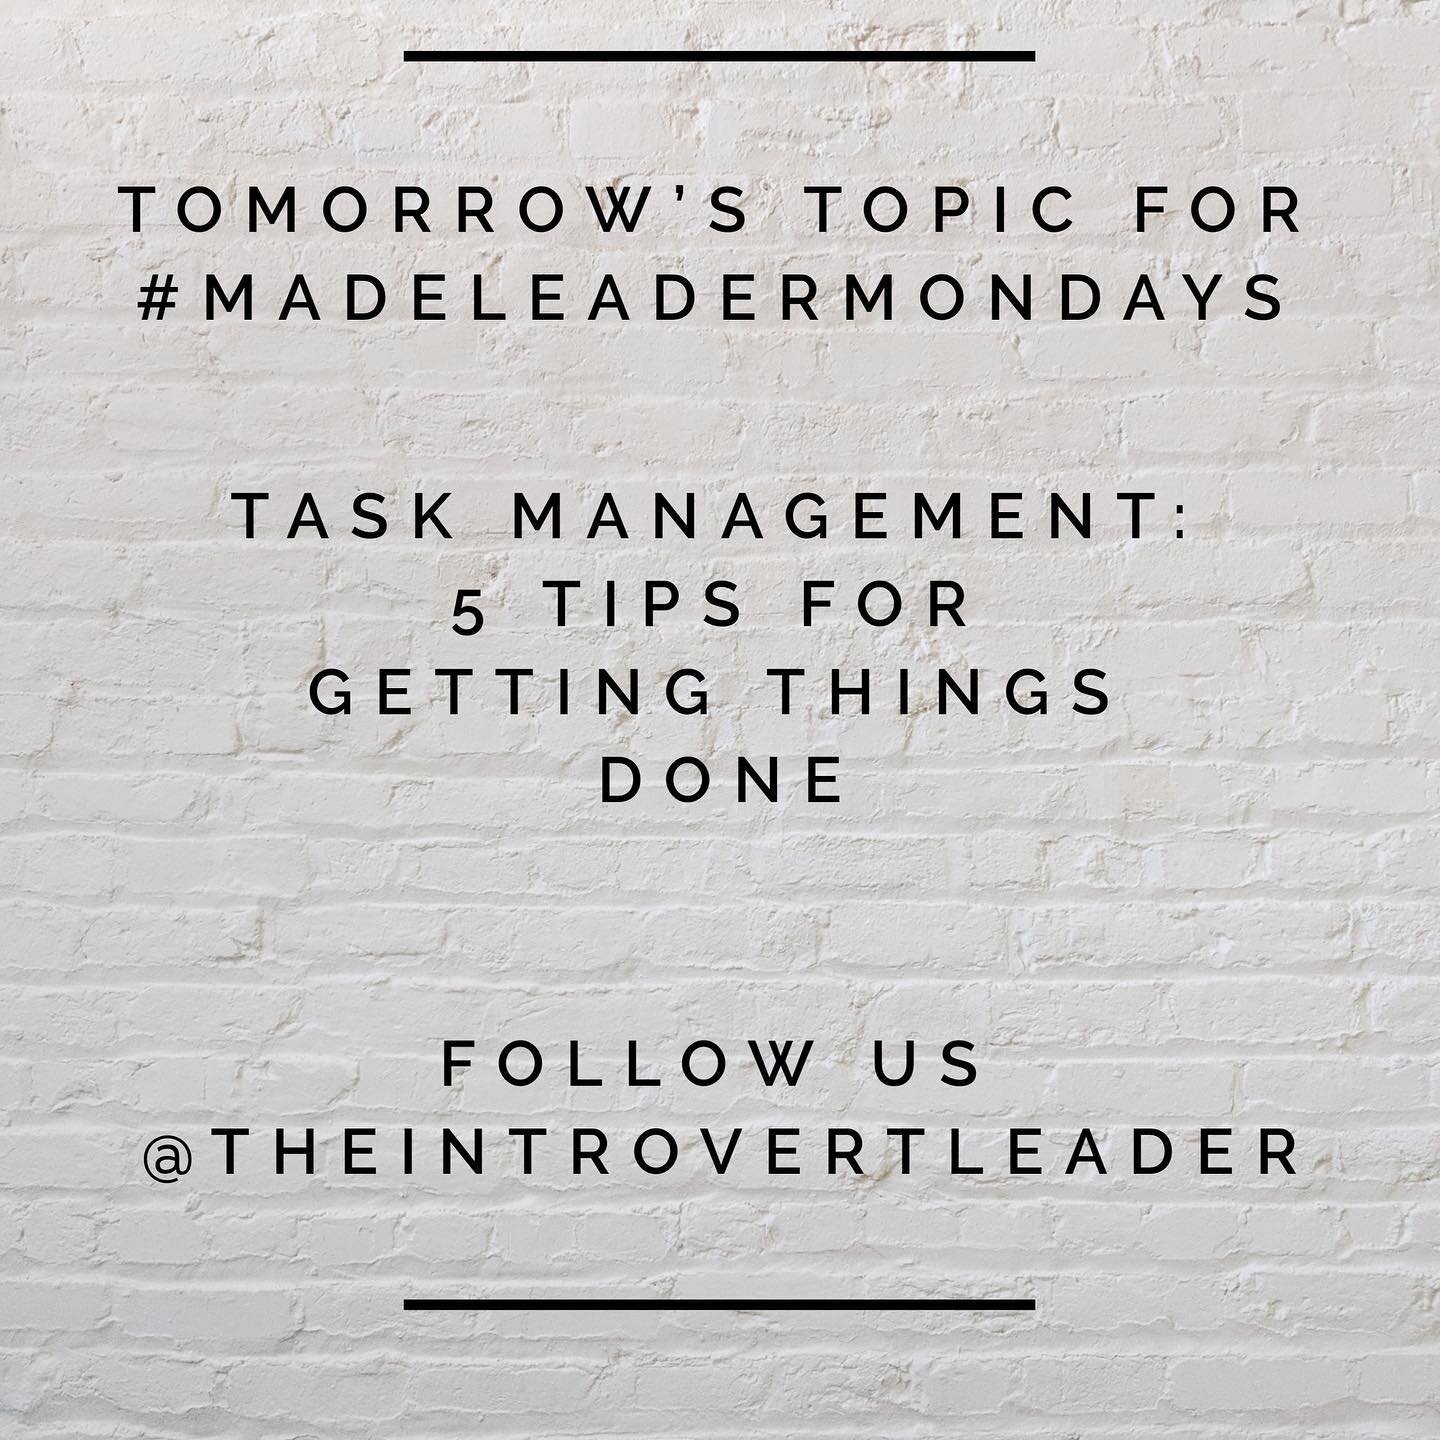 Tomorrow For #MadeLeaderMondays

5 Tips For Getting Things Done 🔥💪🏾
 
We&rsquo;ll be covering a few tips that will help ensure you&rsquo;re able to get the most productivity out of your day ✅

Do you ever feel overwhelmed with your task list at wo